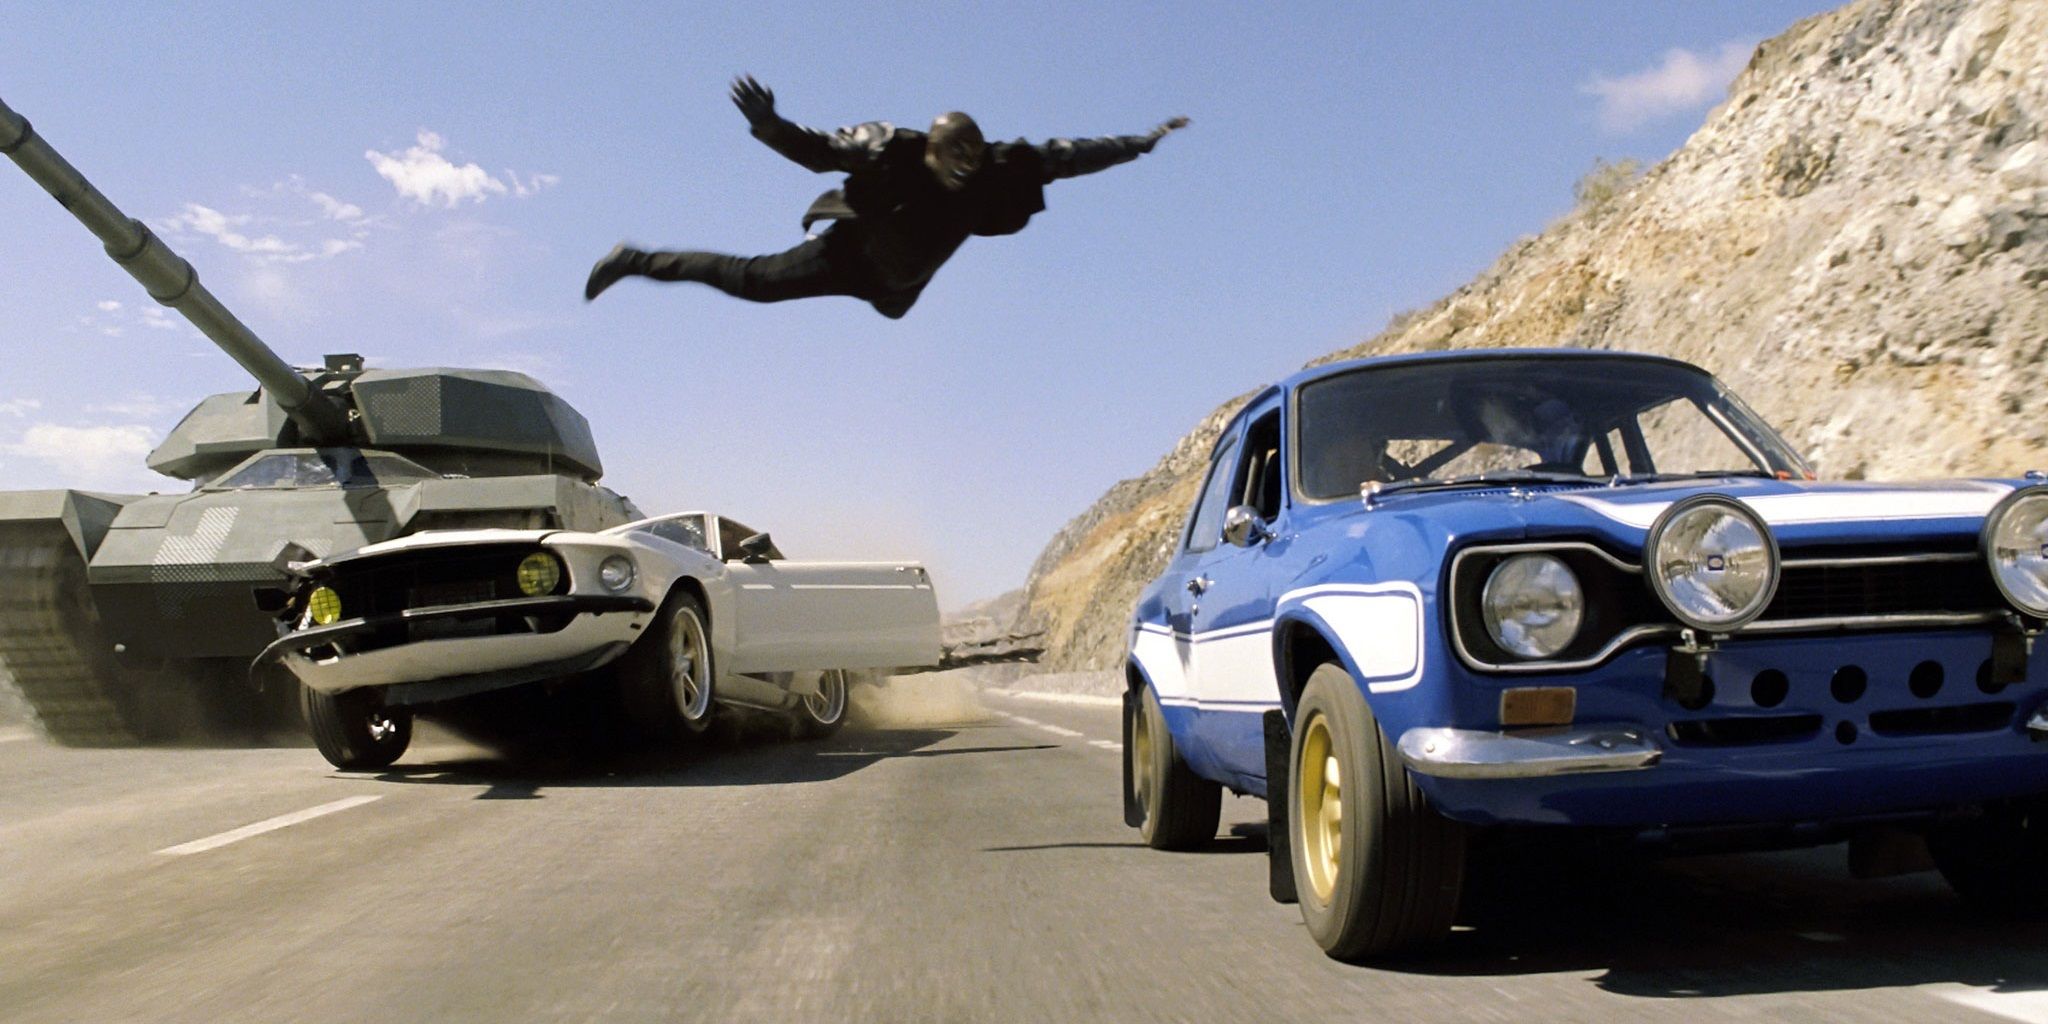 Roman jumps from one car to another in Fast & Furious 6